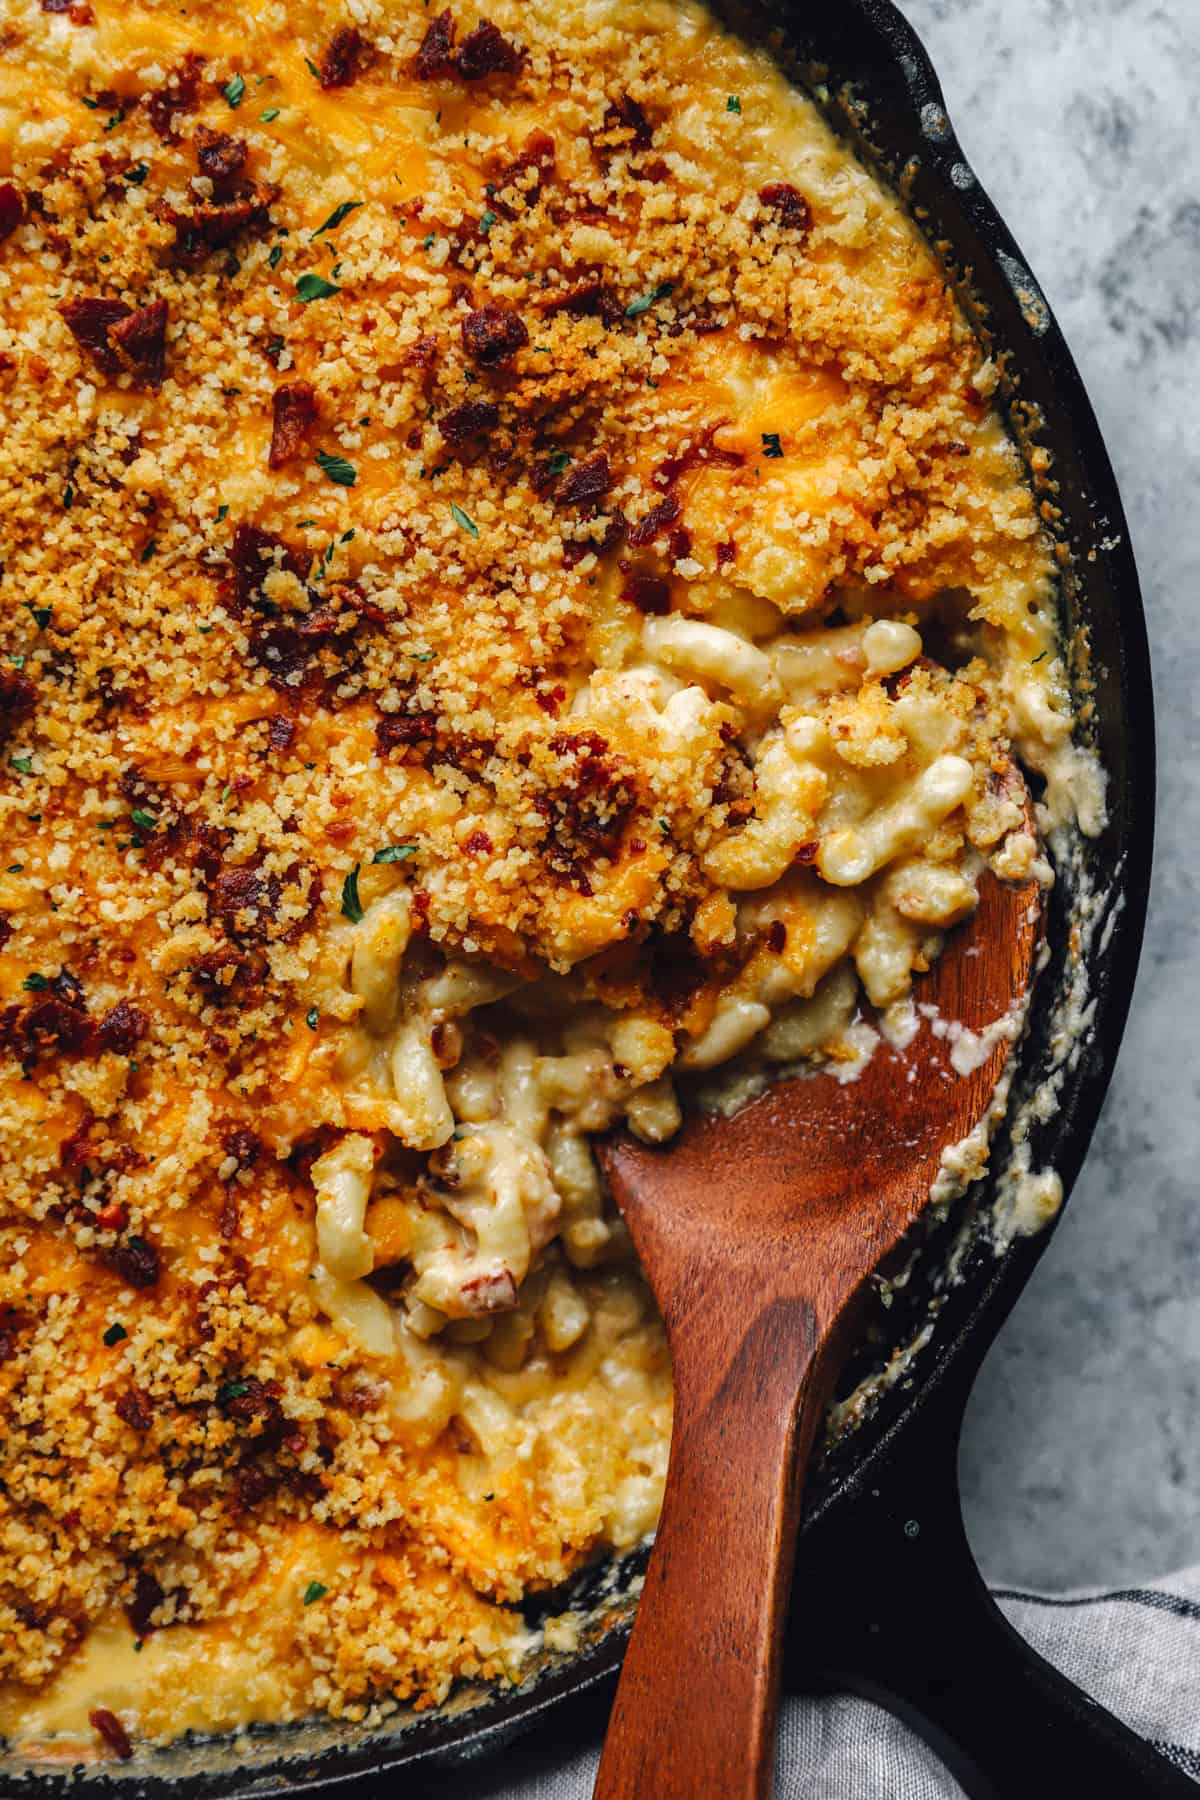 wooden spoon digging into a skillet of Mac and cheese